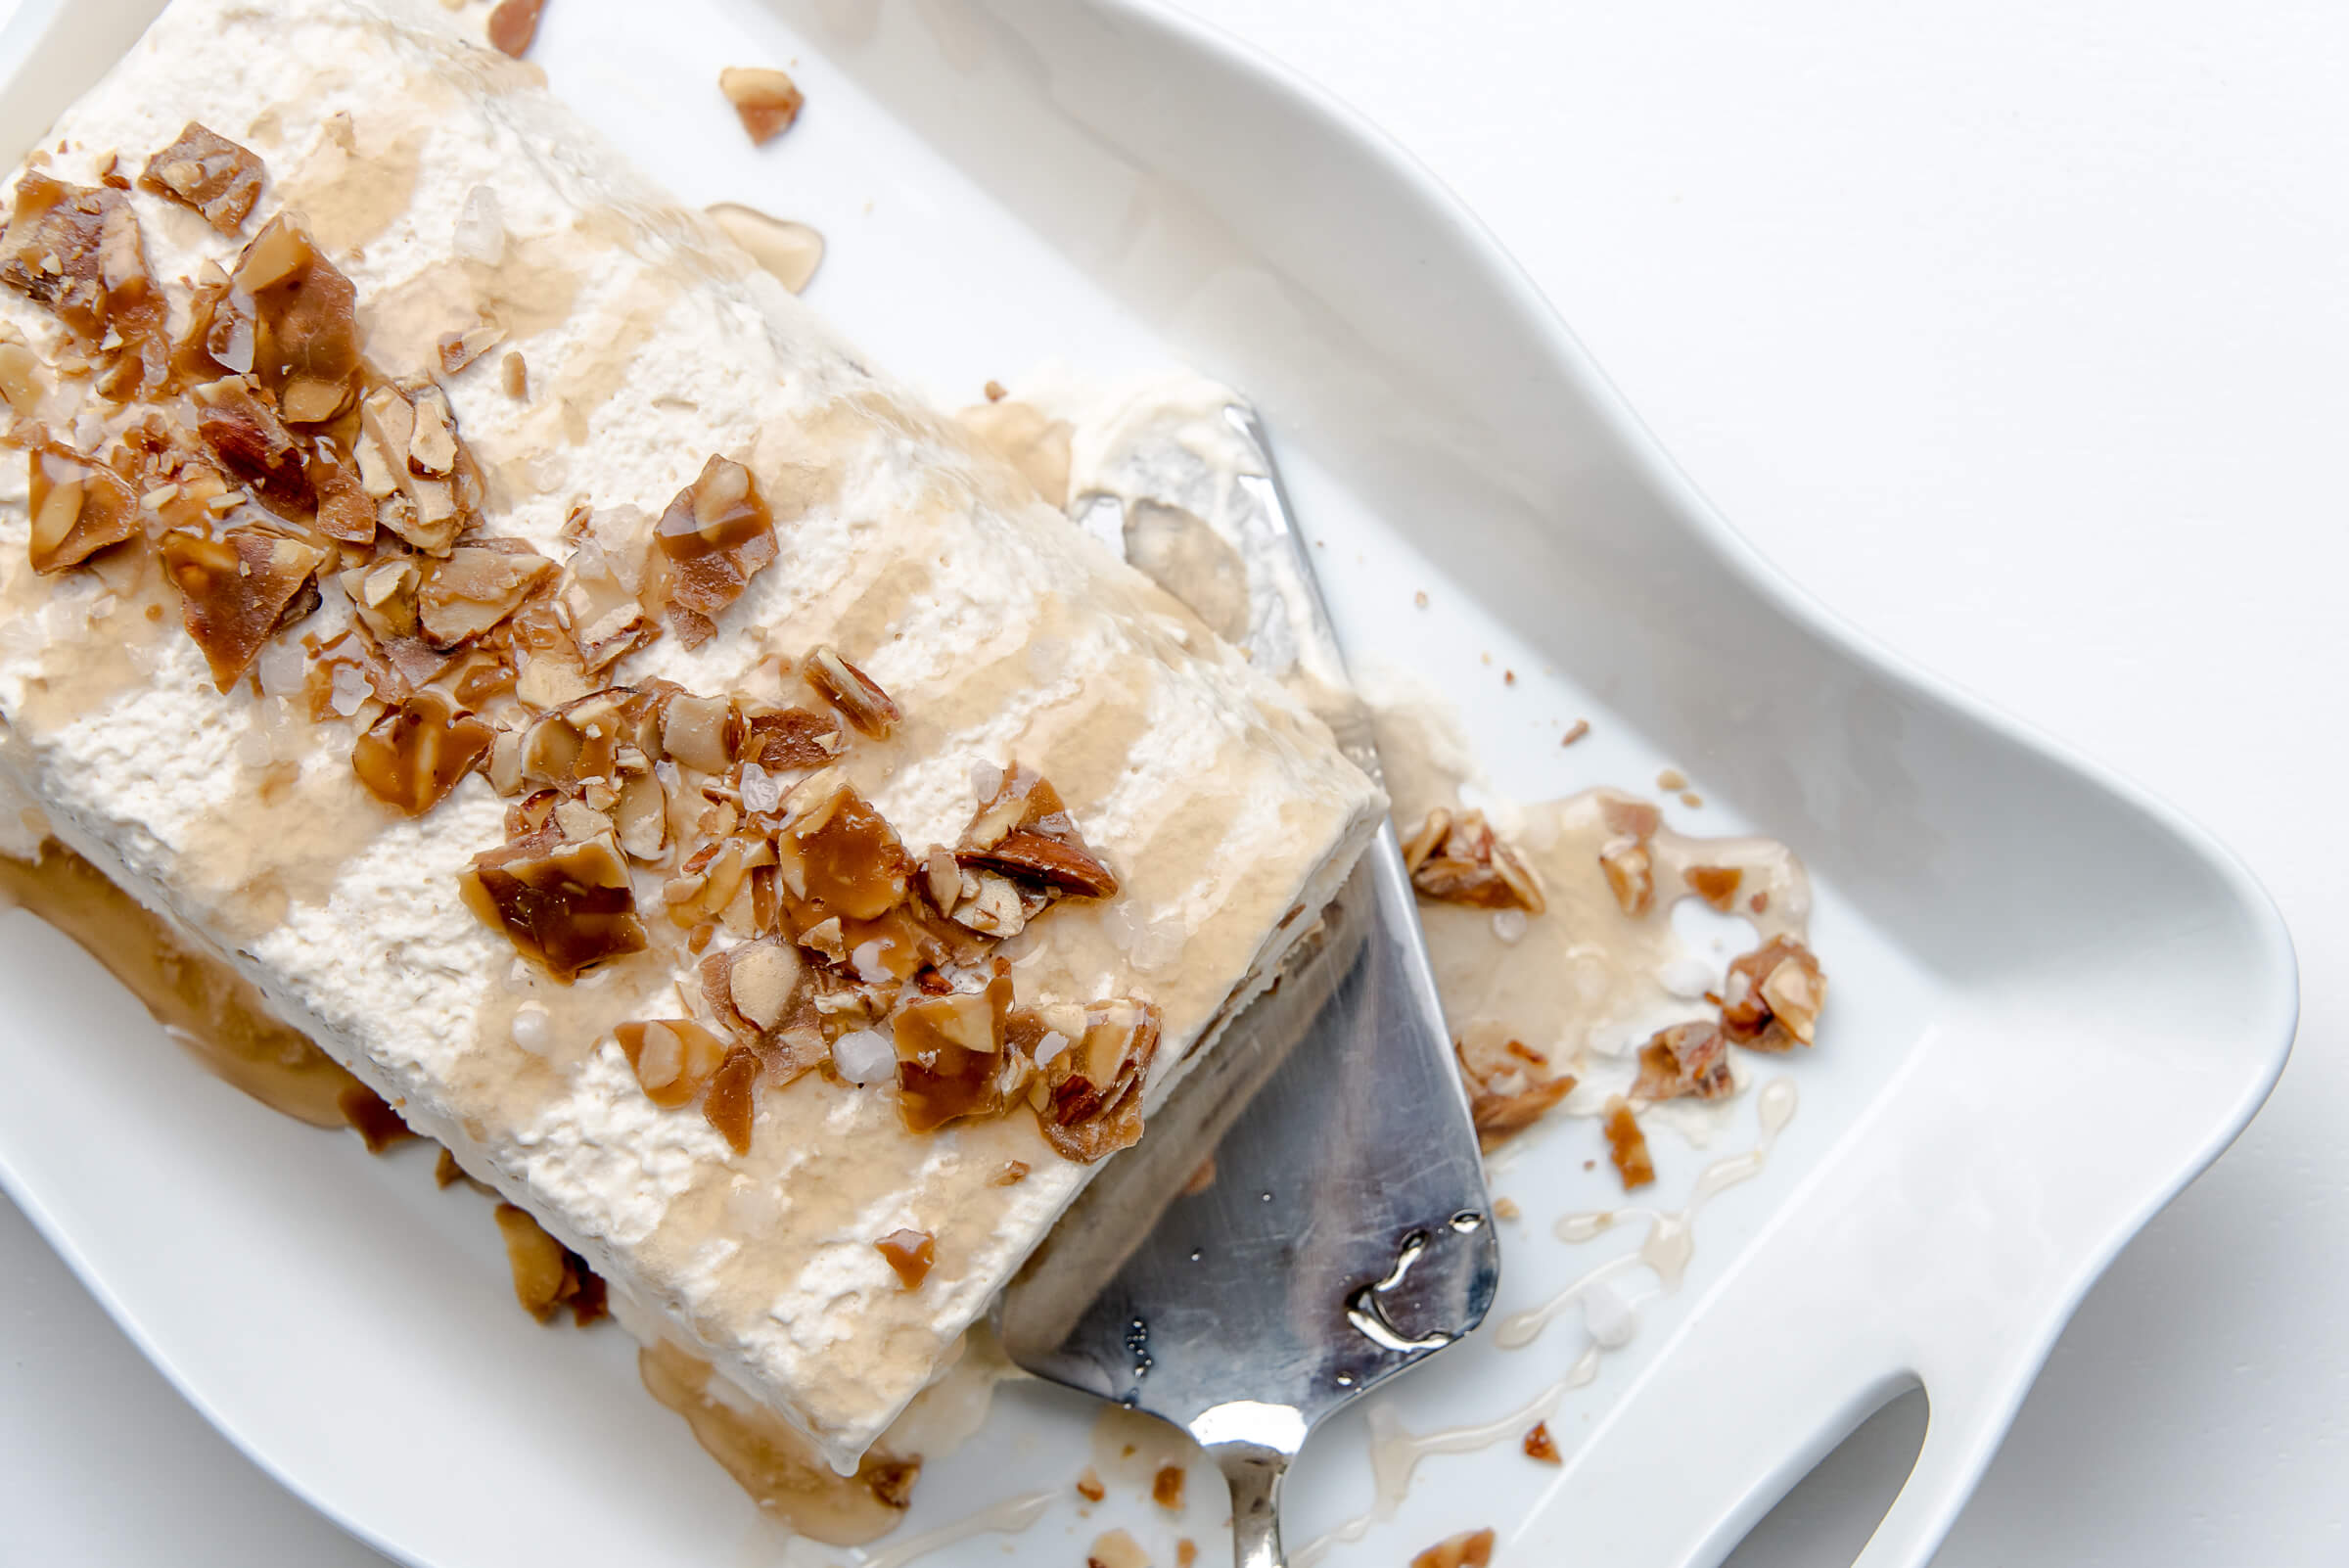 keto salted caramel semi fredo with candied almonds featuring keto chow